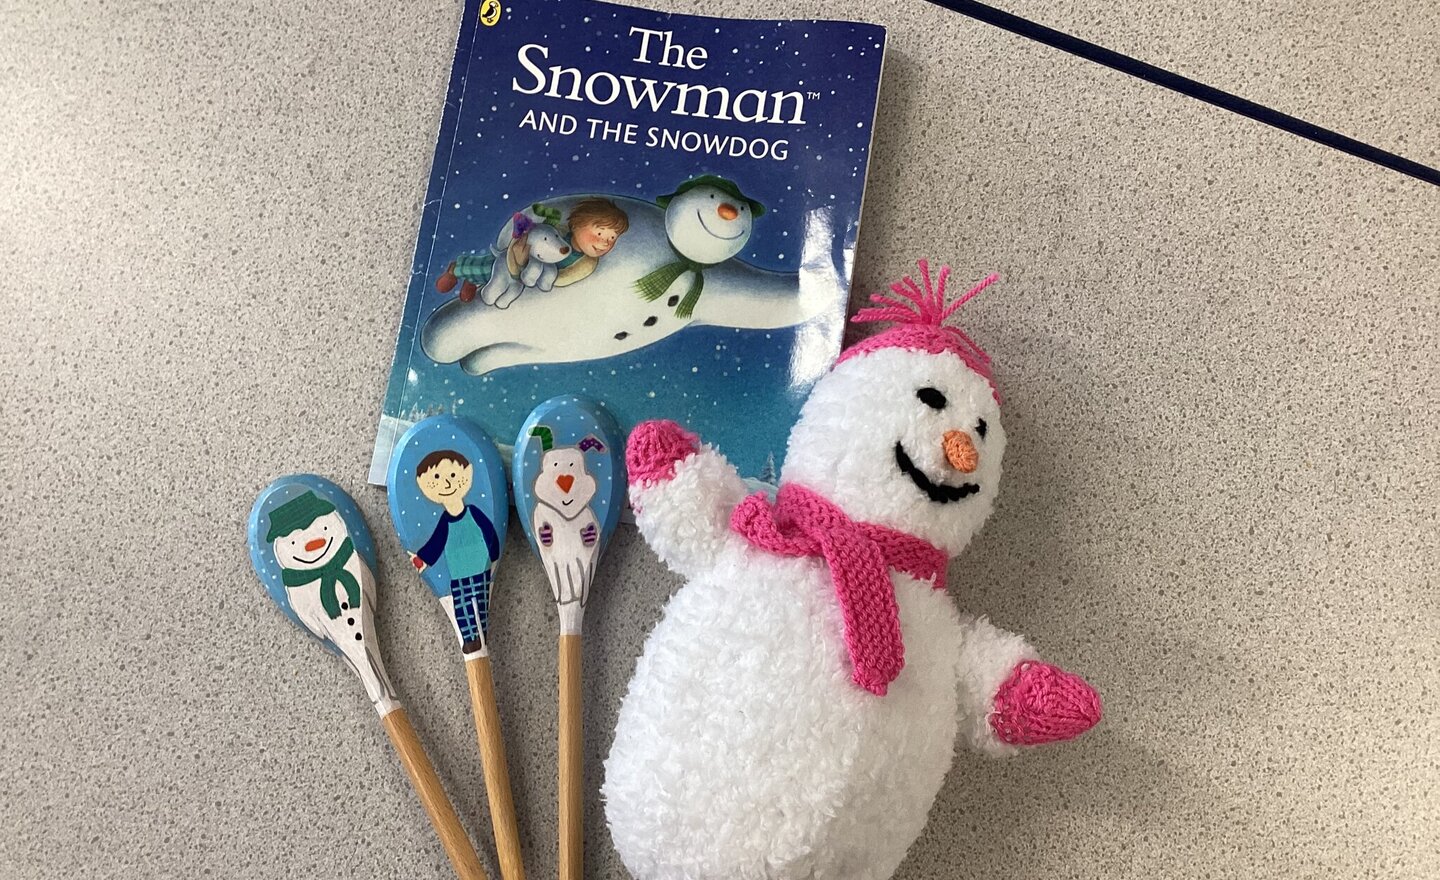 Image of The Snowman and the Snowdog